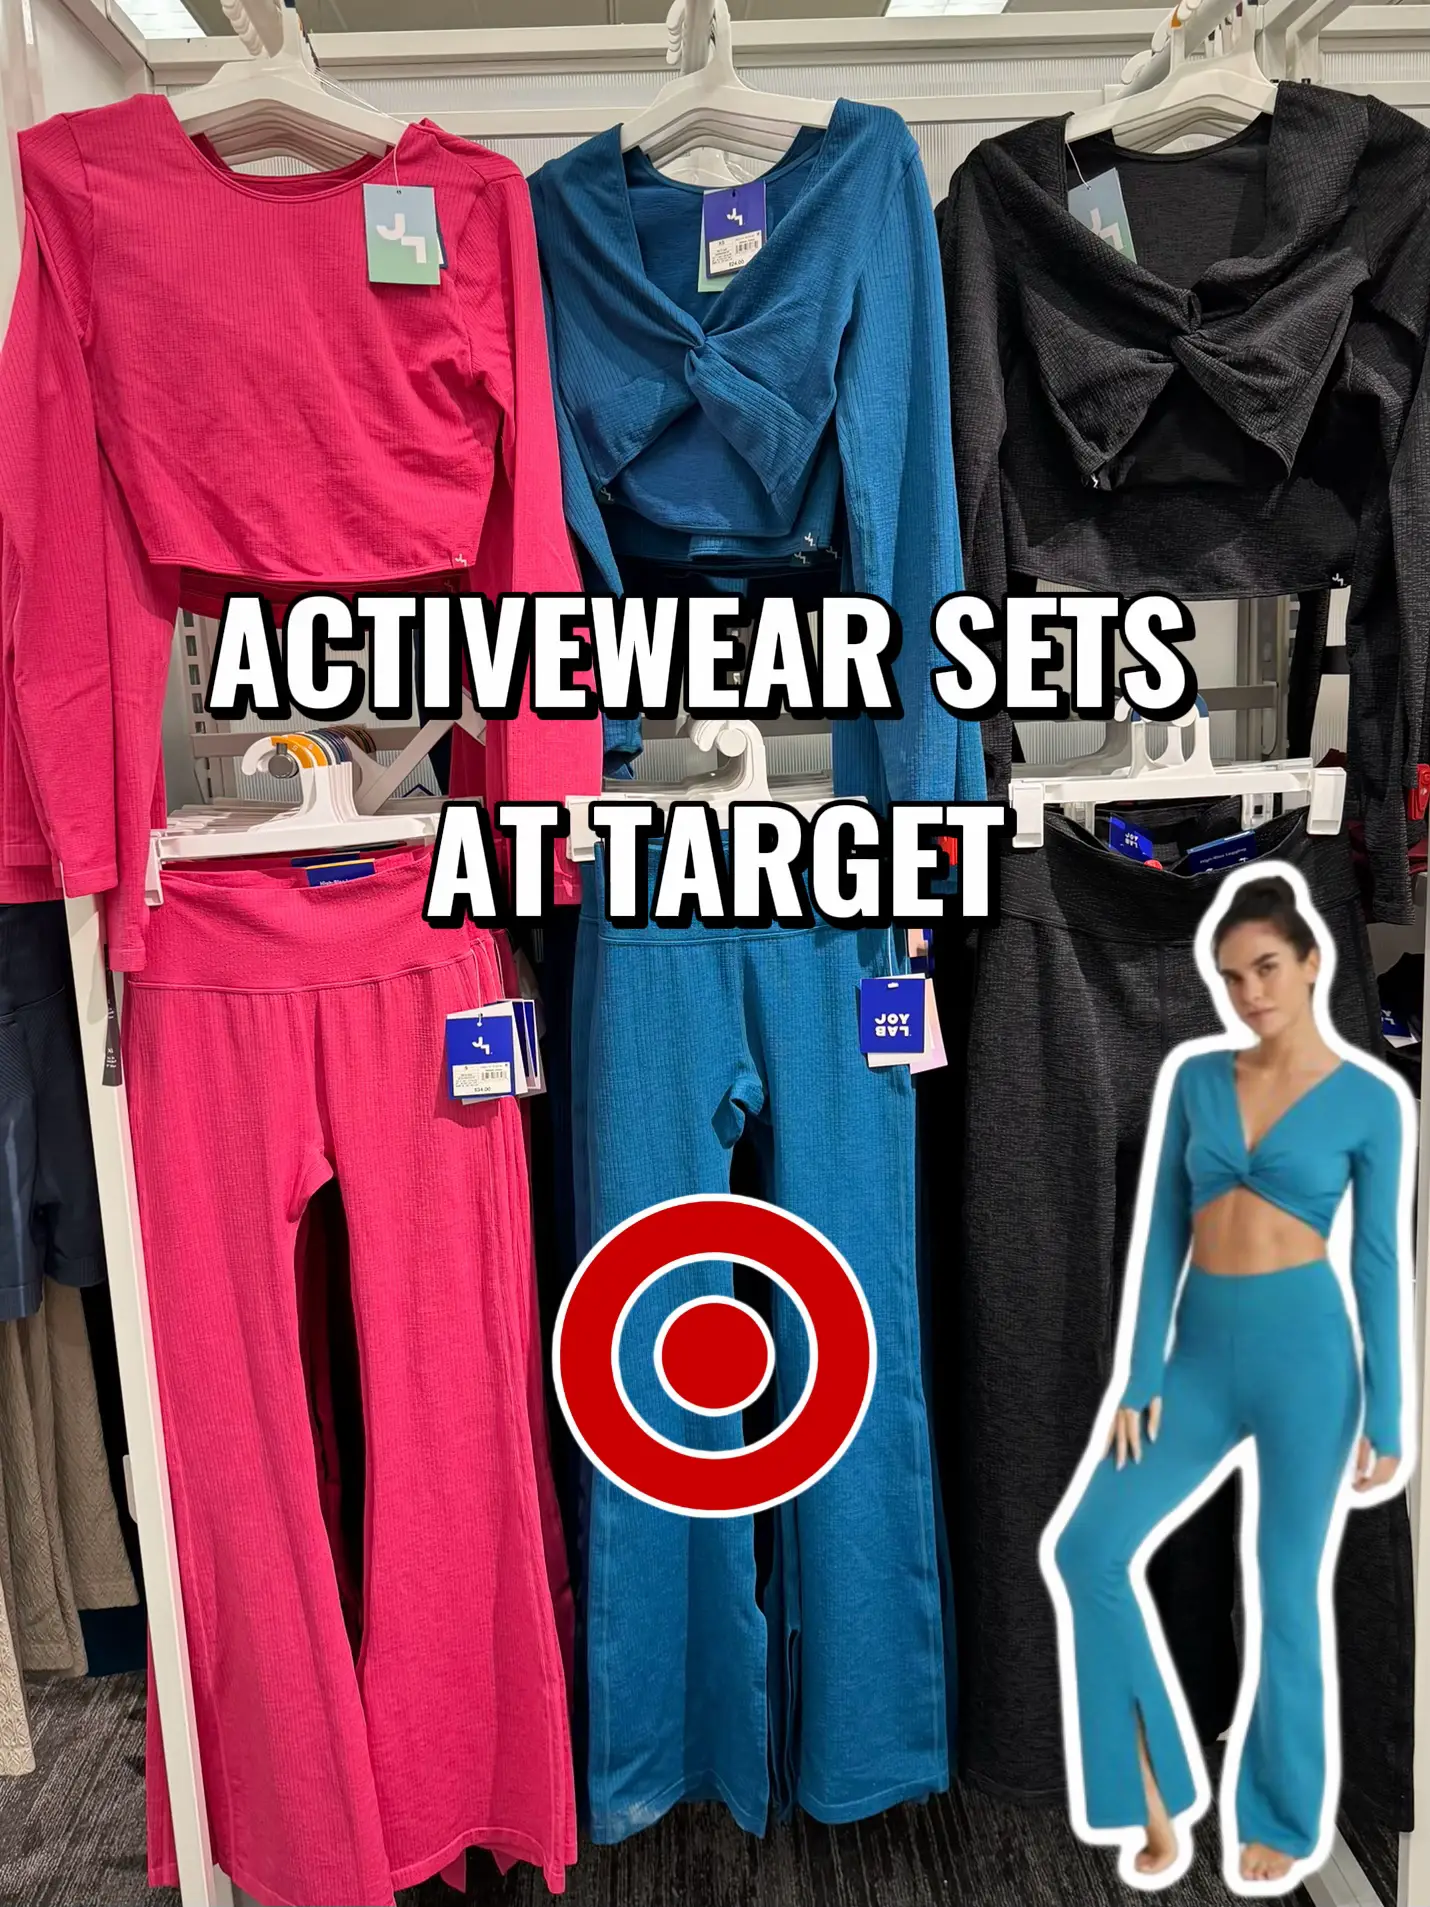 Chic Activewear Picks: My Favorites From Wiskii